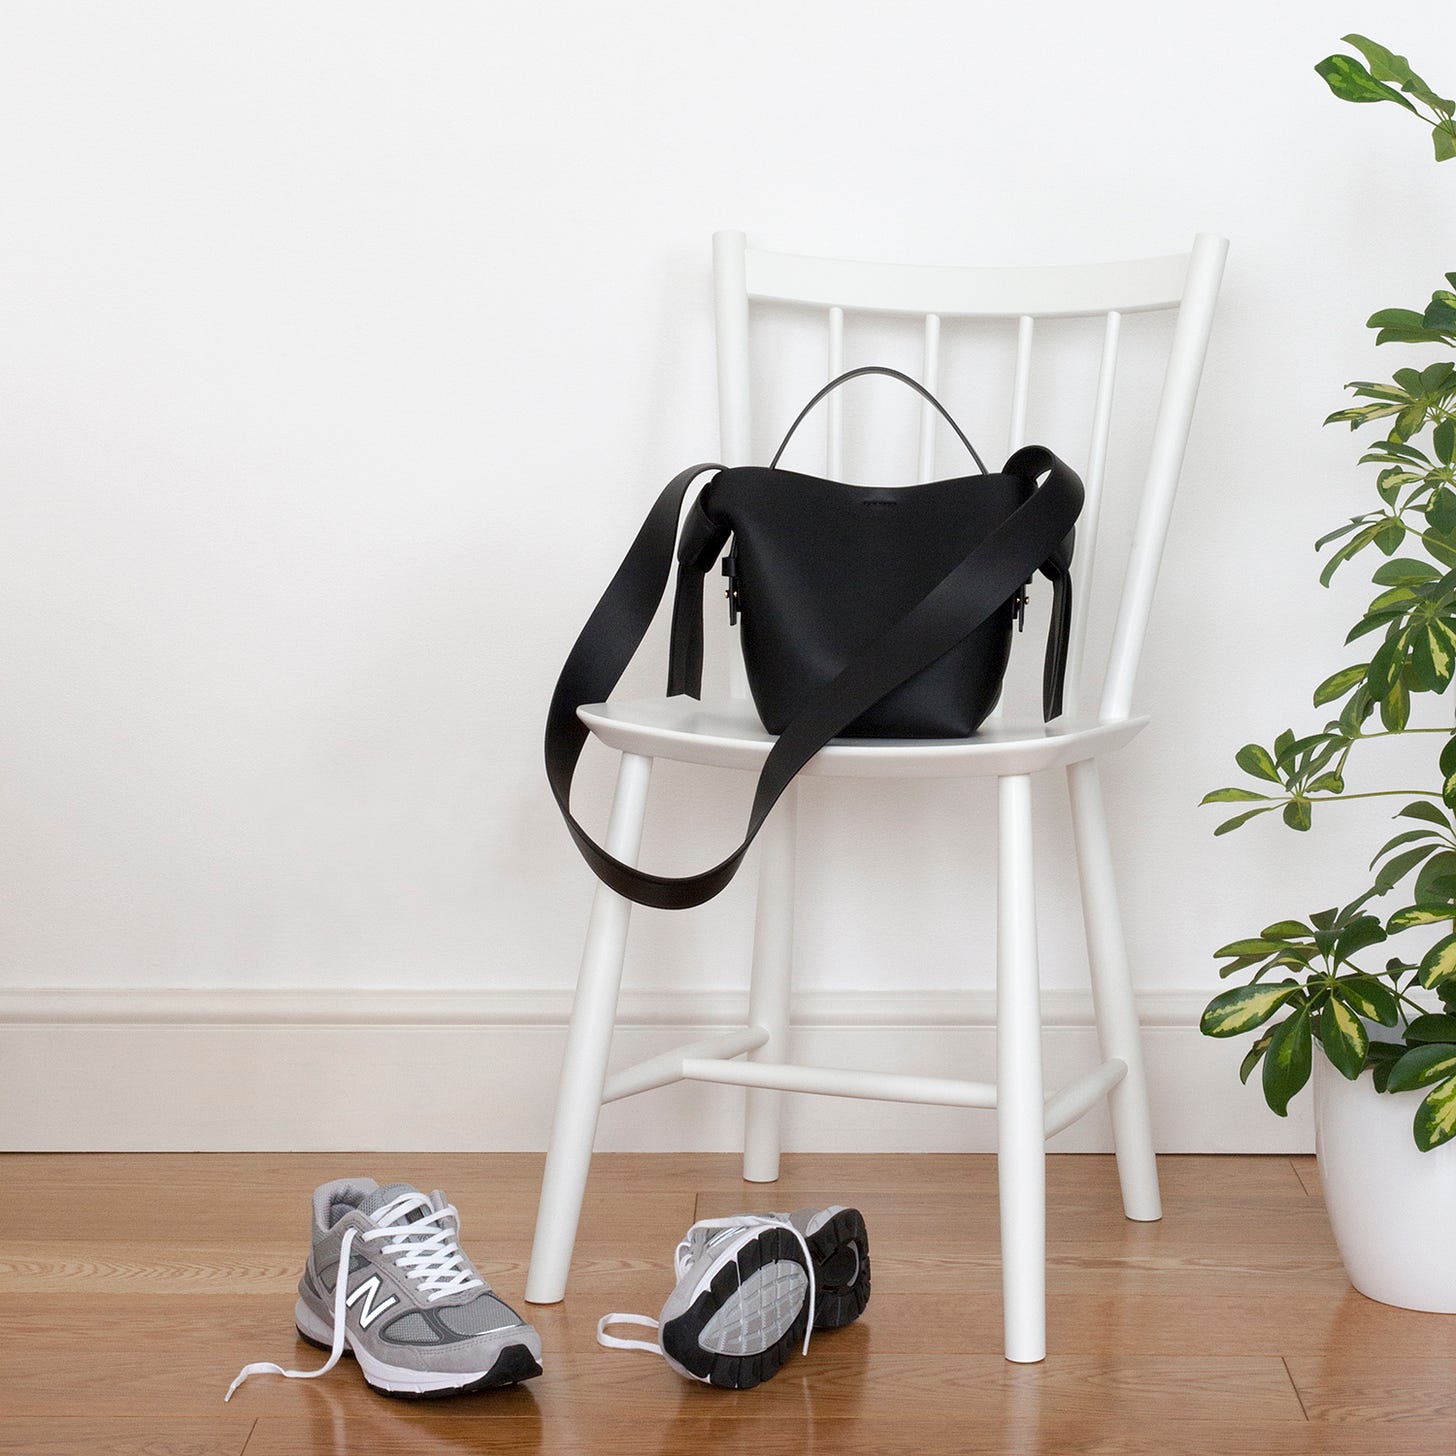 Photo of a white chair, bag and trainers.